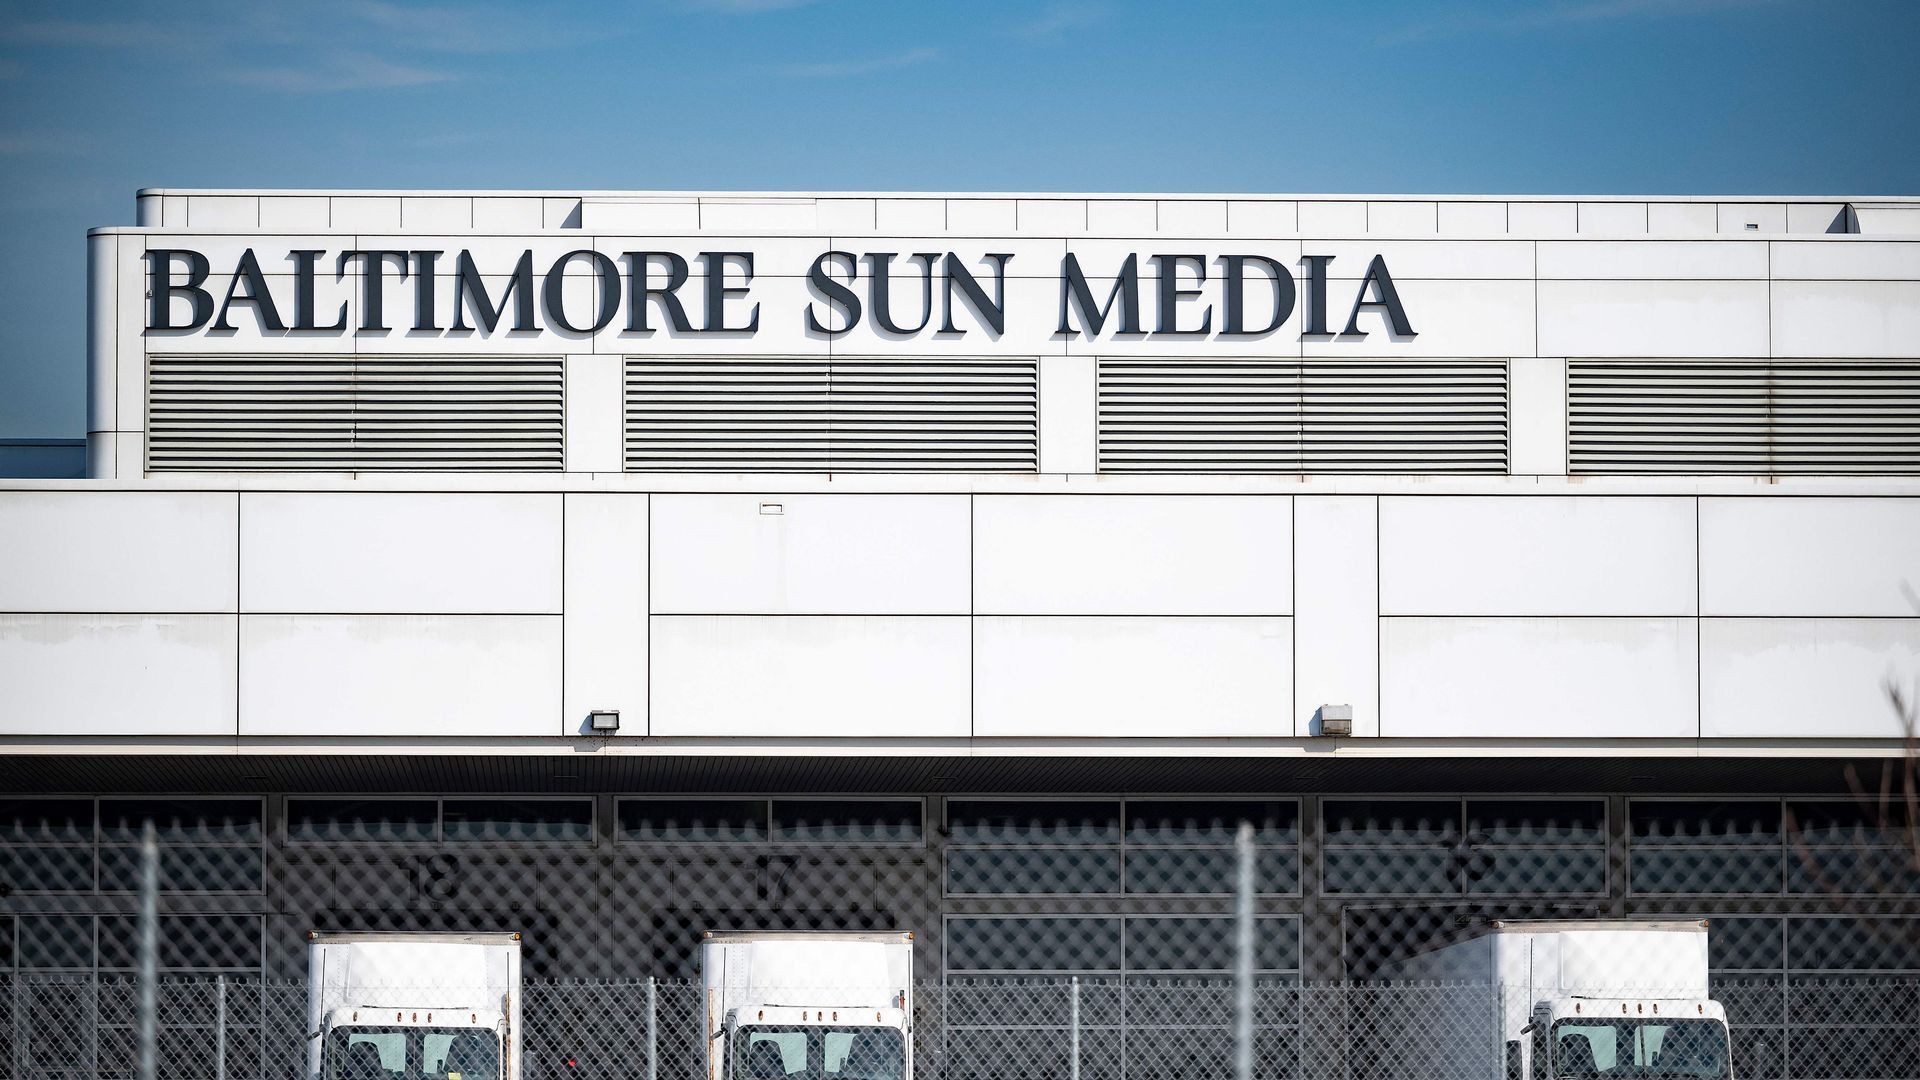 The exterior of the Baltimore Sun Media building, with delivery trucks parked outside.